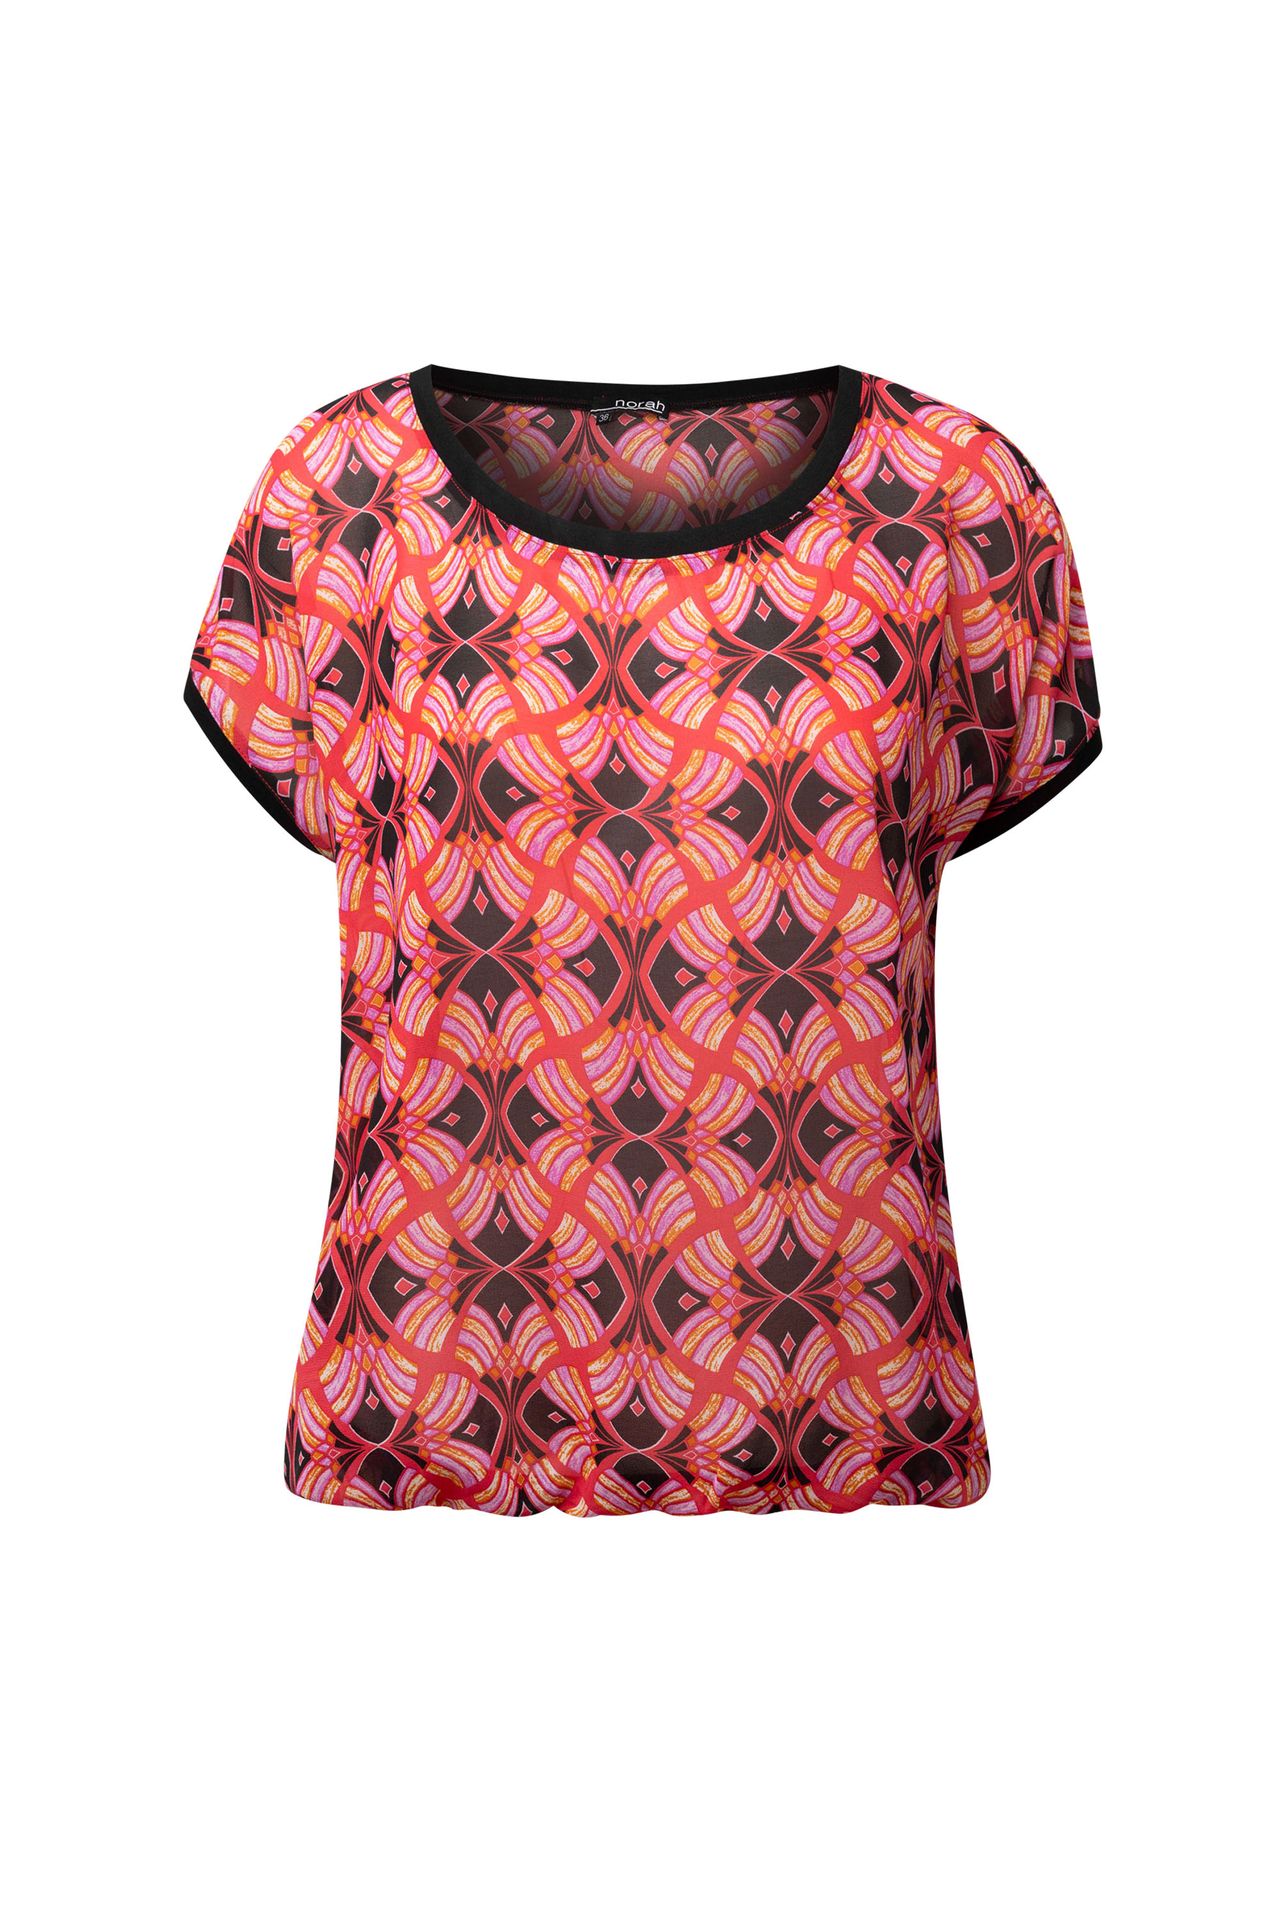 Norah Rode blouse red multicolor 214171-620